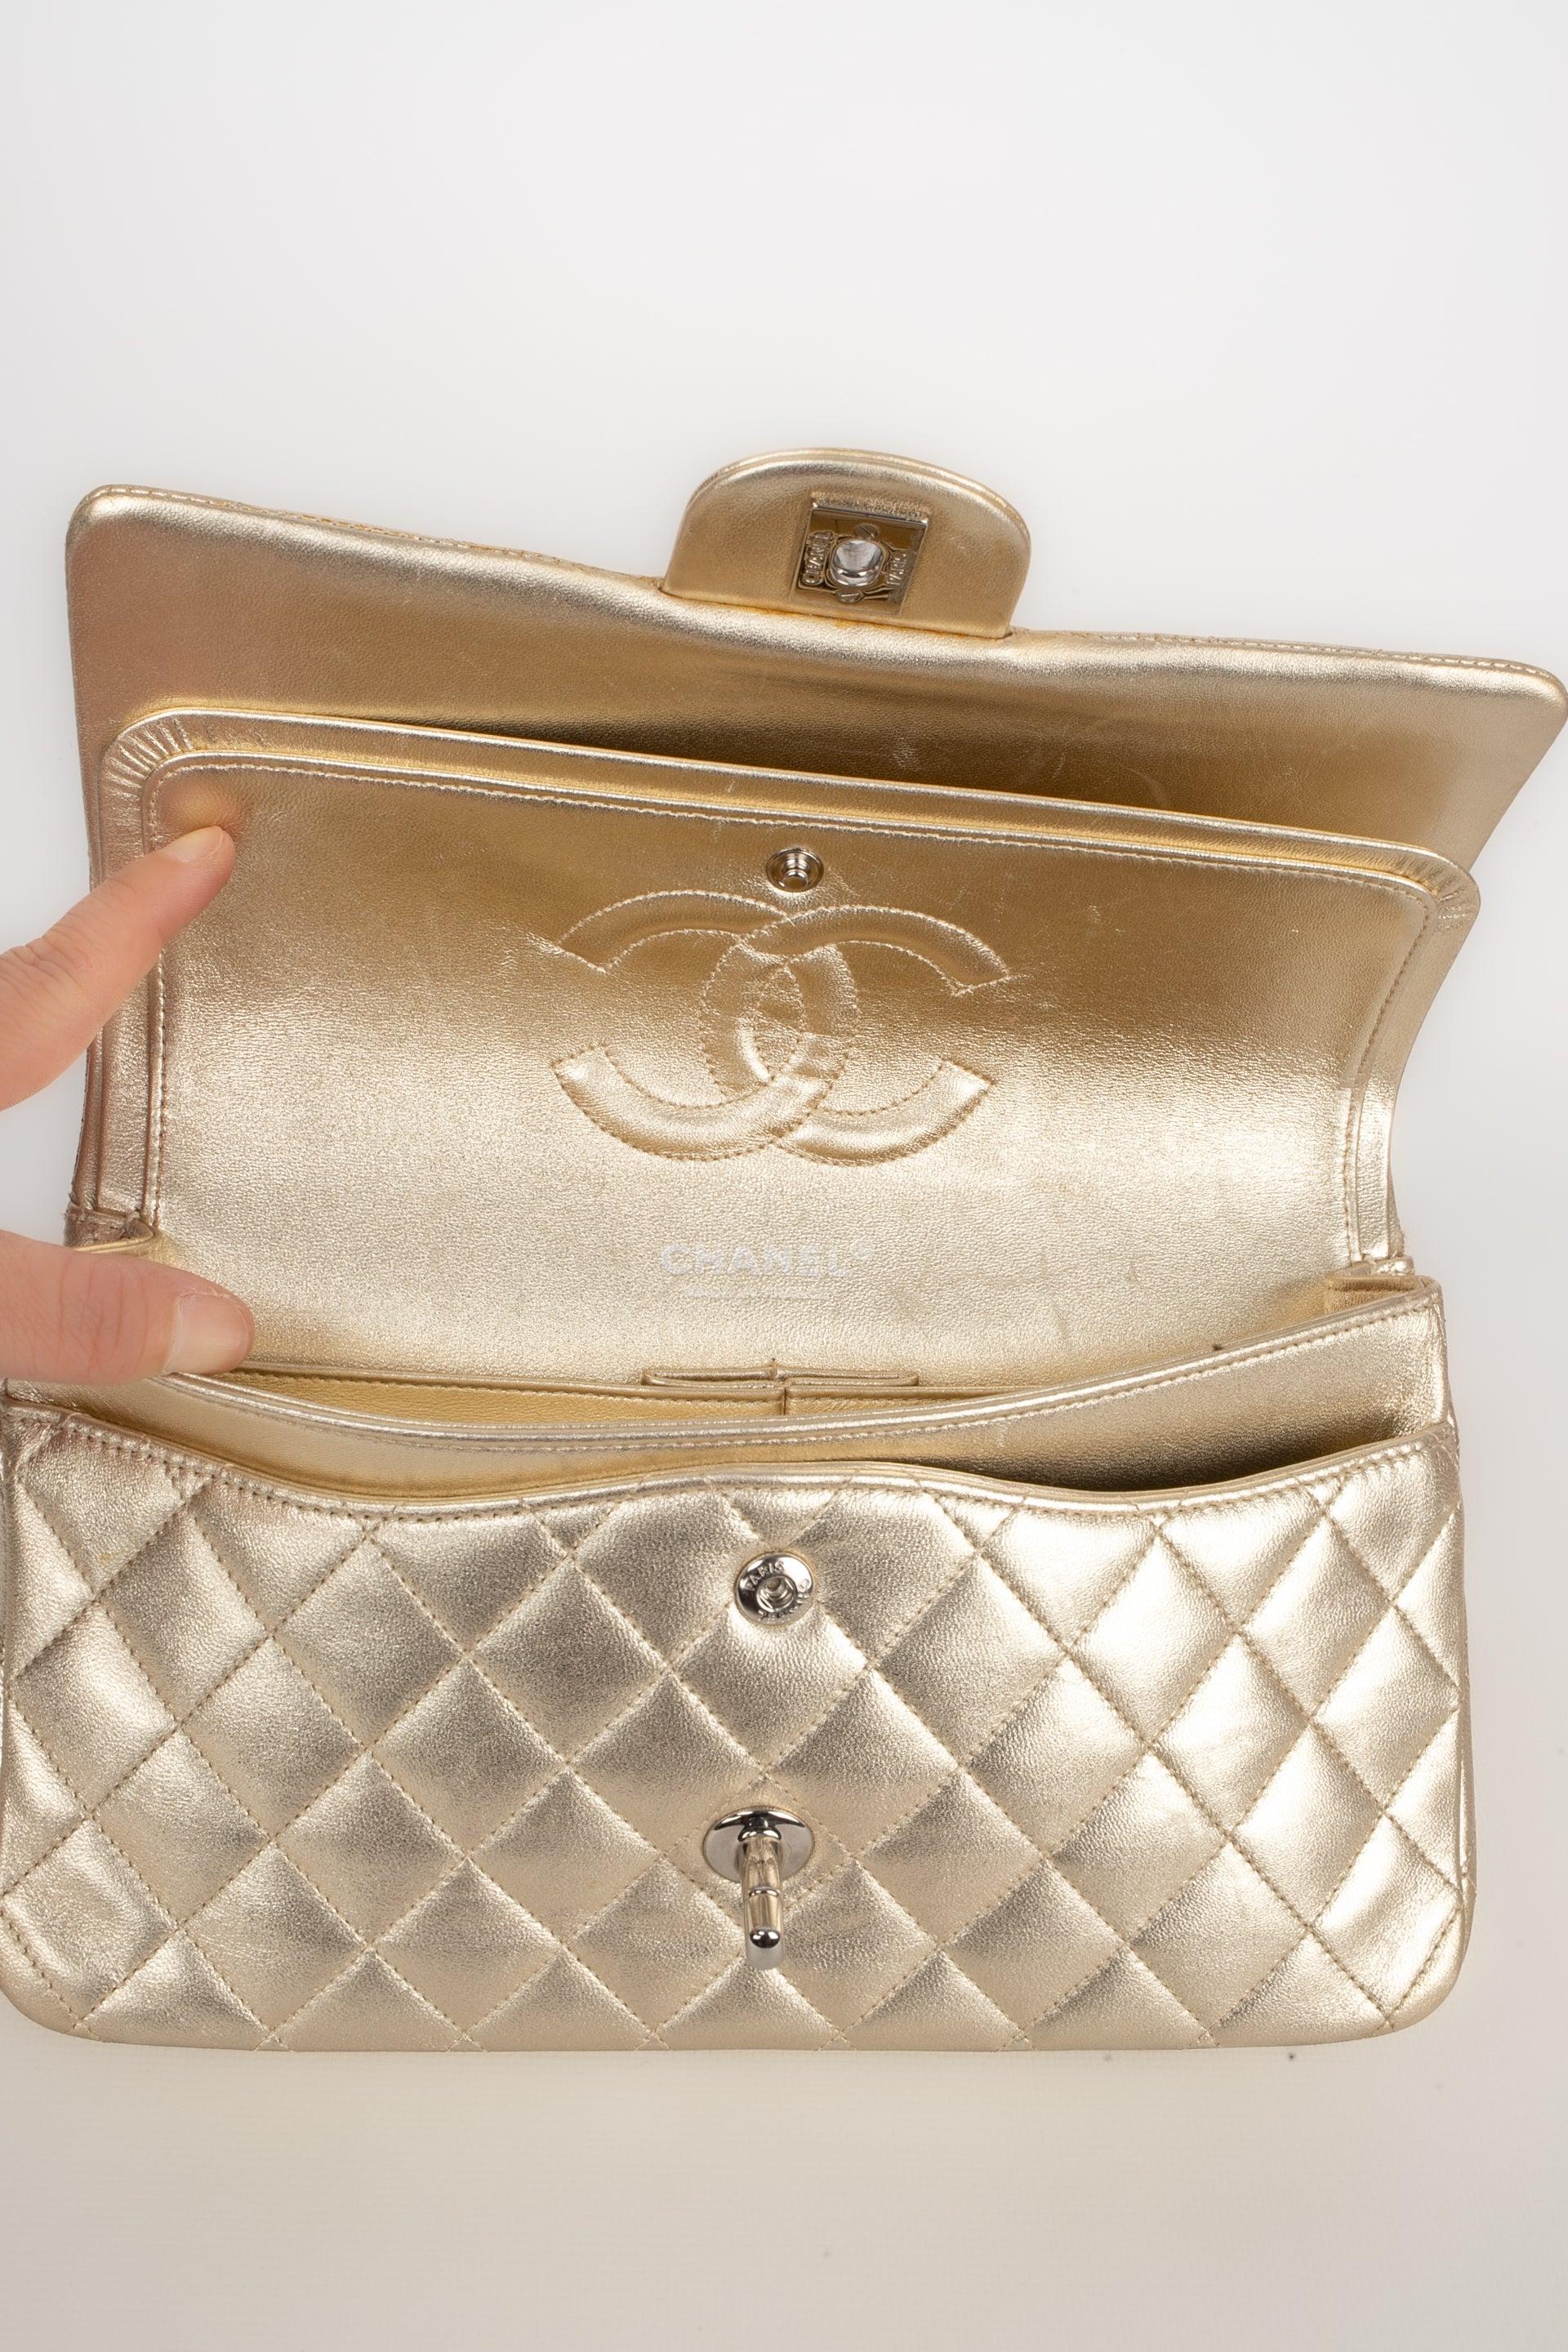 Chanel Timeless Pale-Golden Metallic Lamb Leather Classic Bag, 2006/2008 For Sale 4